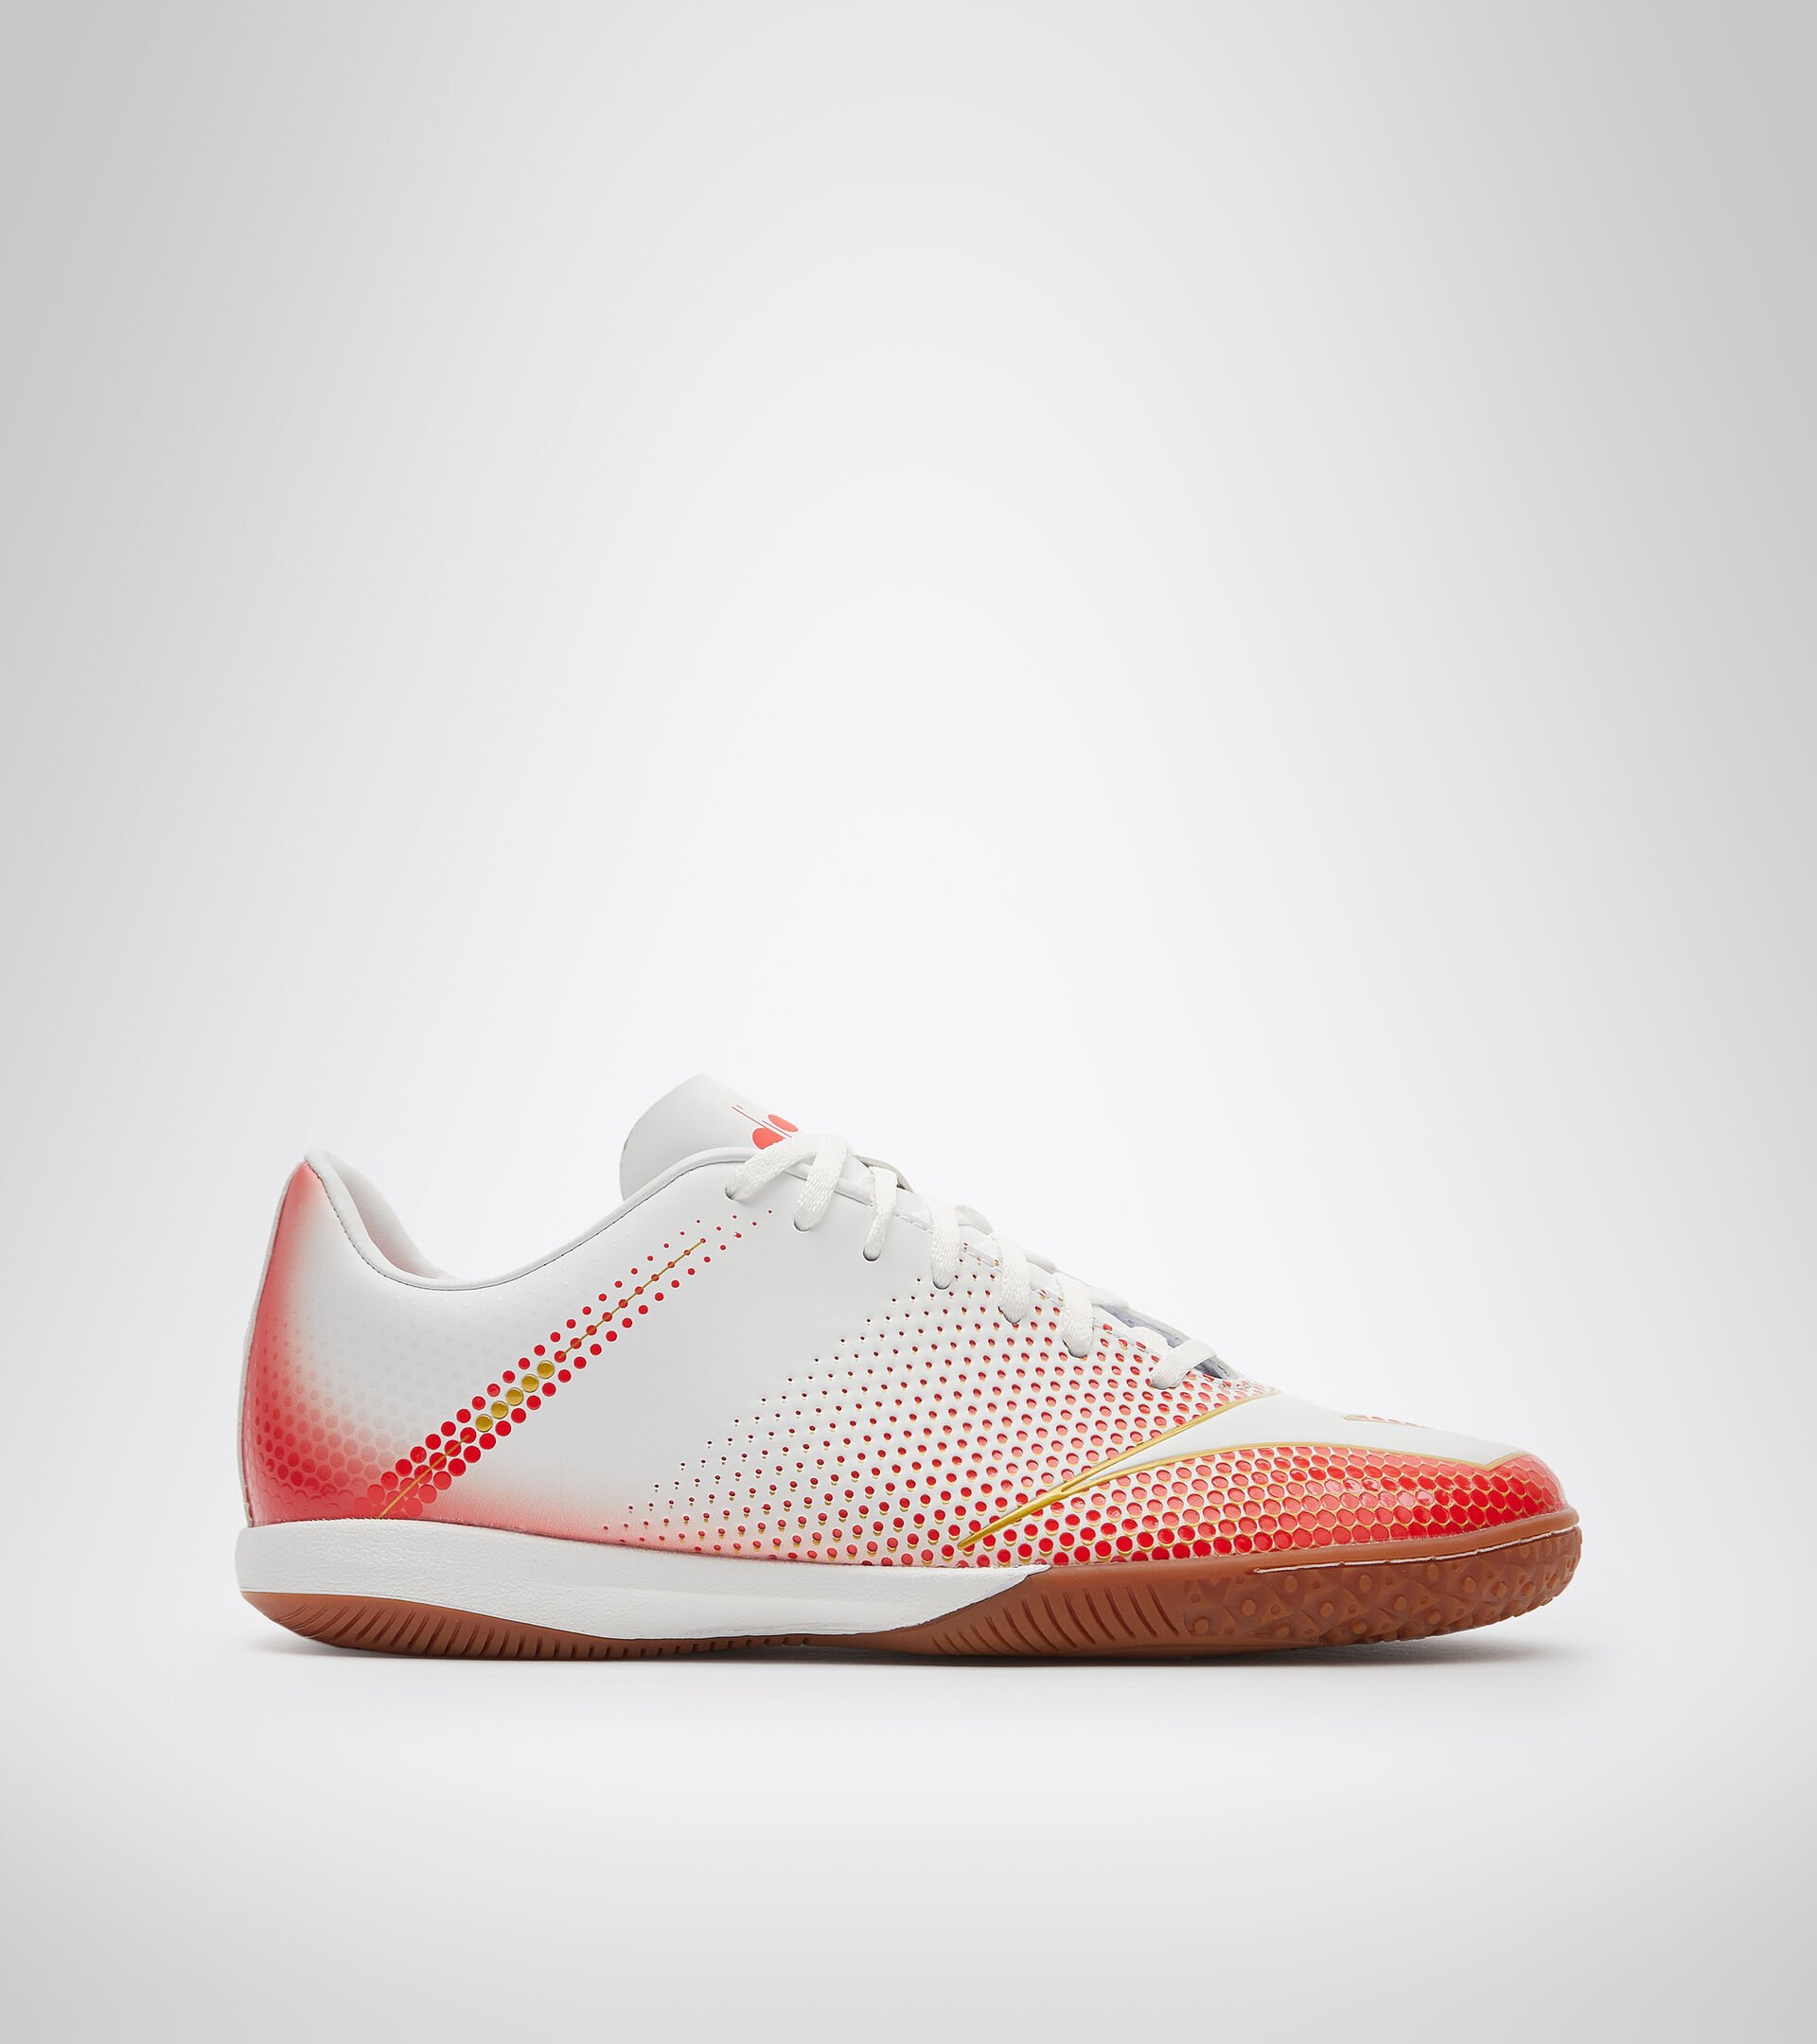 Indoor and parquet court futsal boots BOMBER IDR WHITE/RED FLUO/GOLD - Diadora